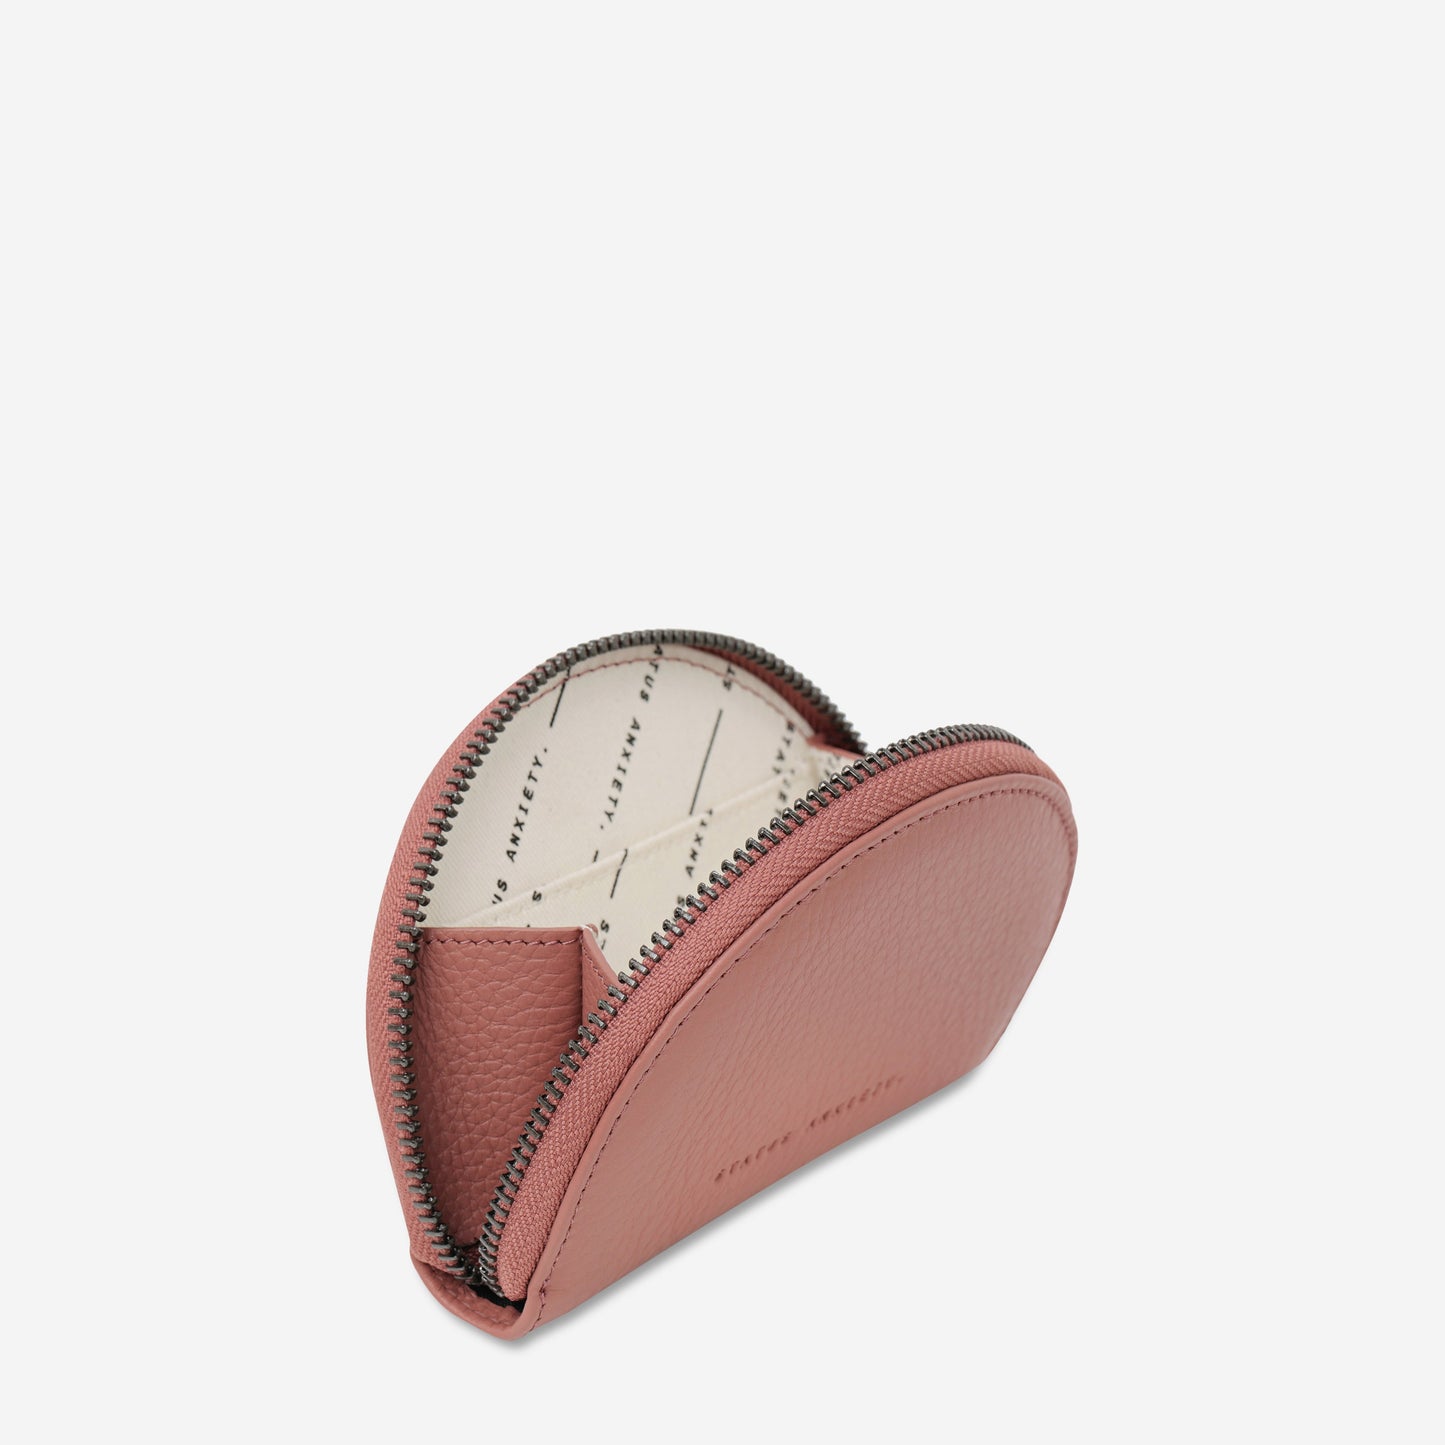 Lucid Leather Wallet - Dusty Rose